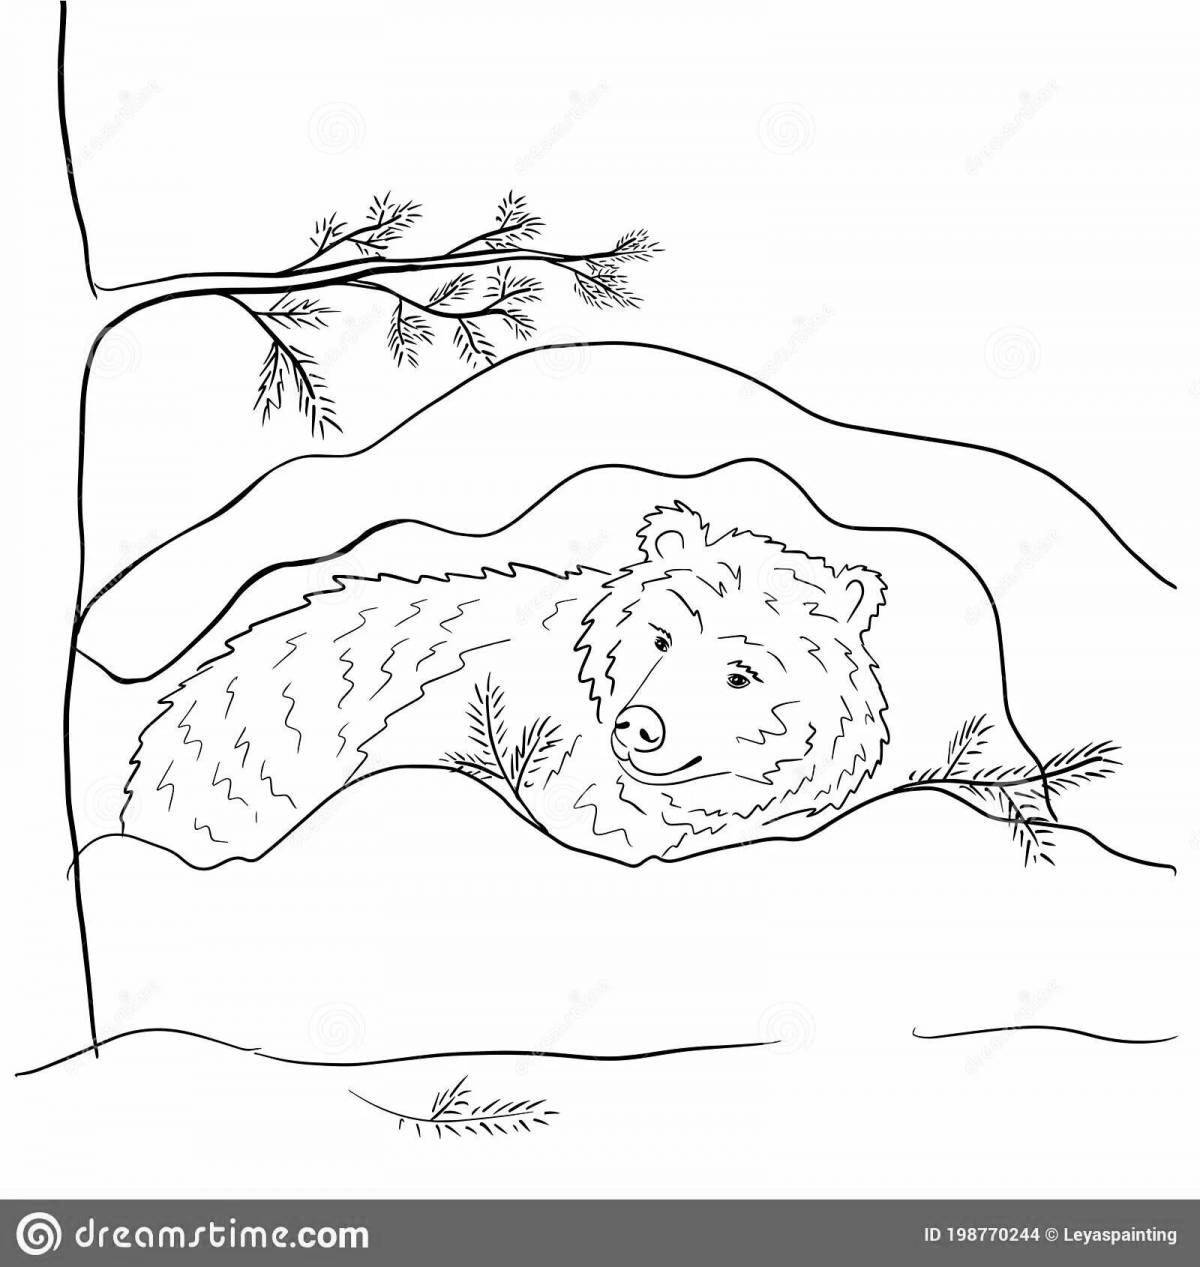 Radiant coloring page: why do bears sleep in winter?